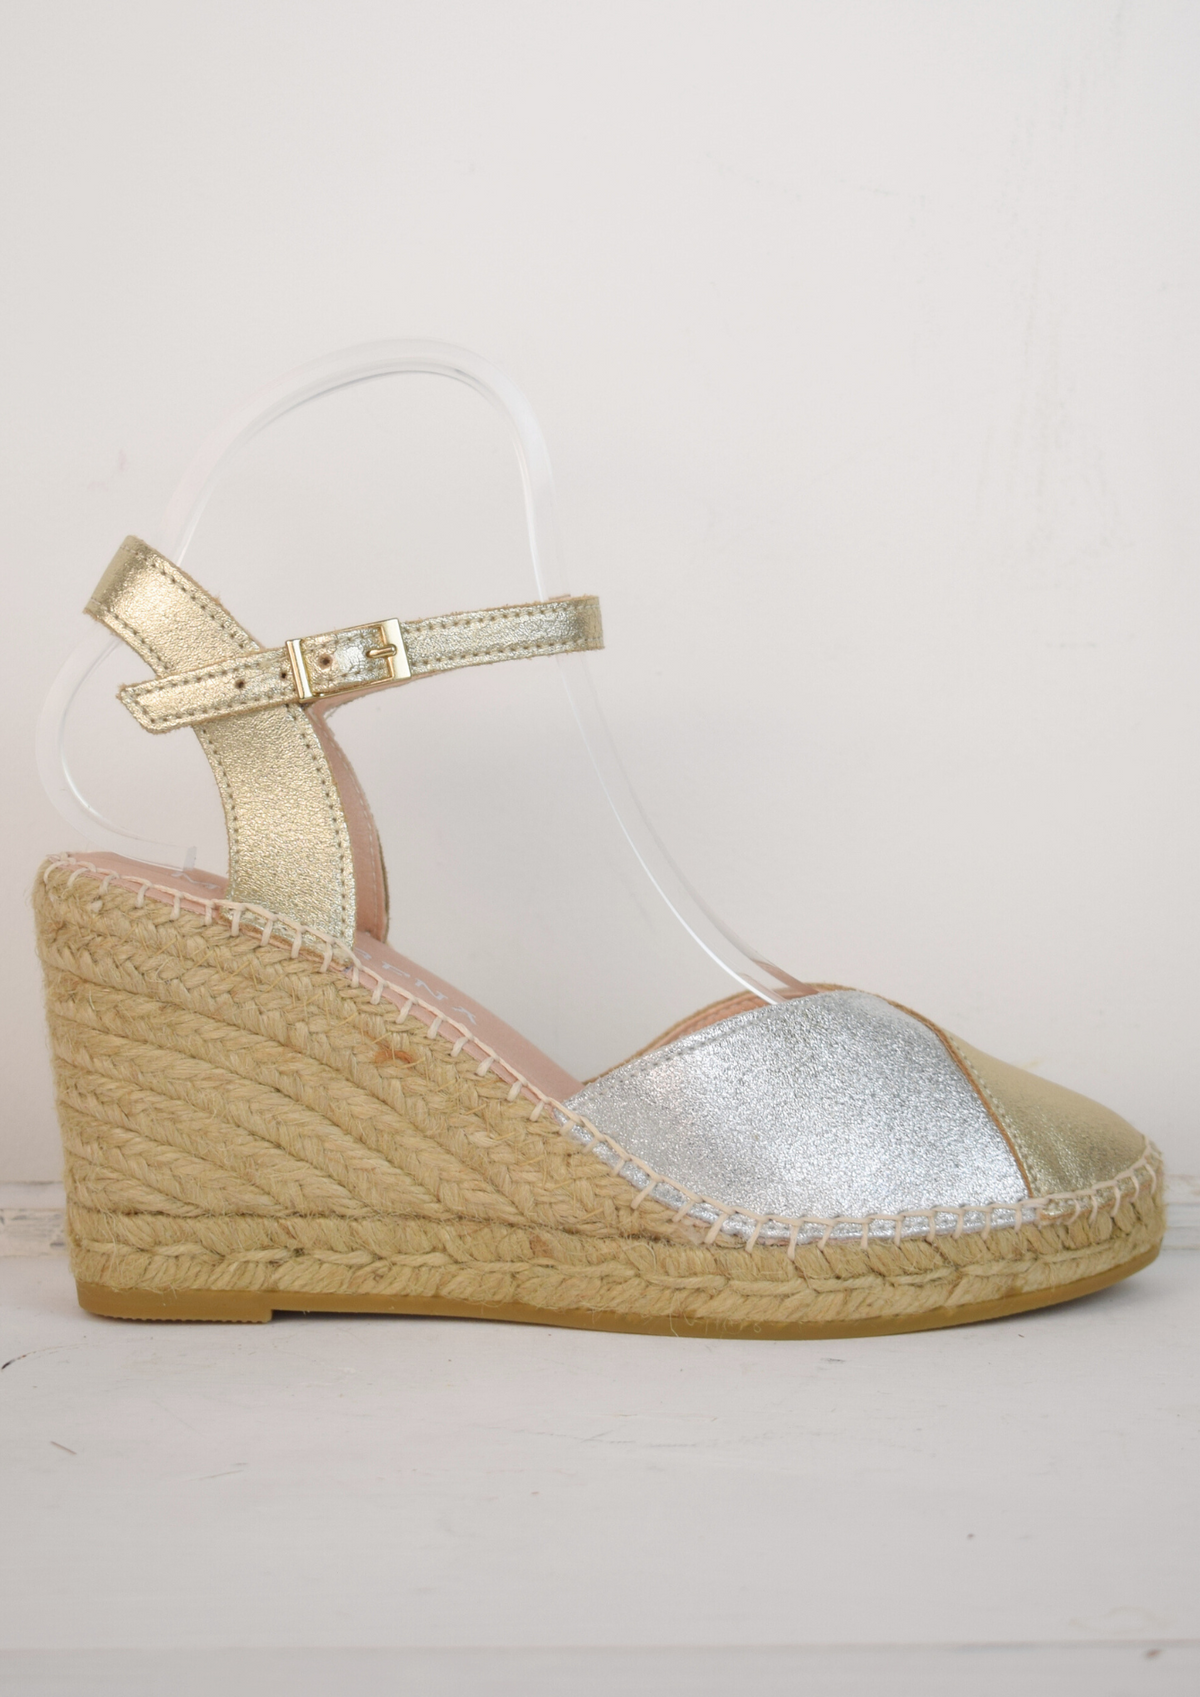 A raffia wedge sandal with a 2 tone top. Made up of silver and gold.